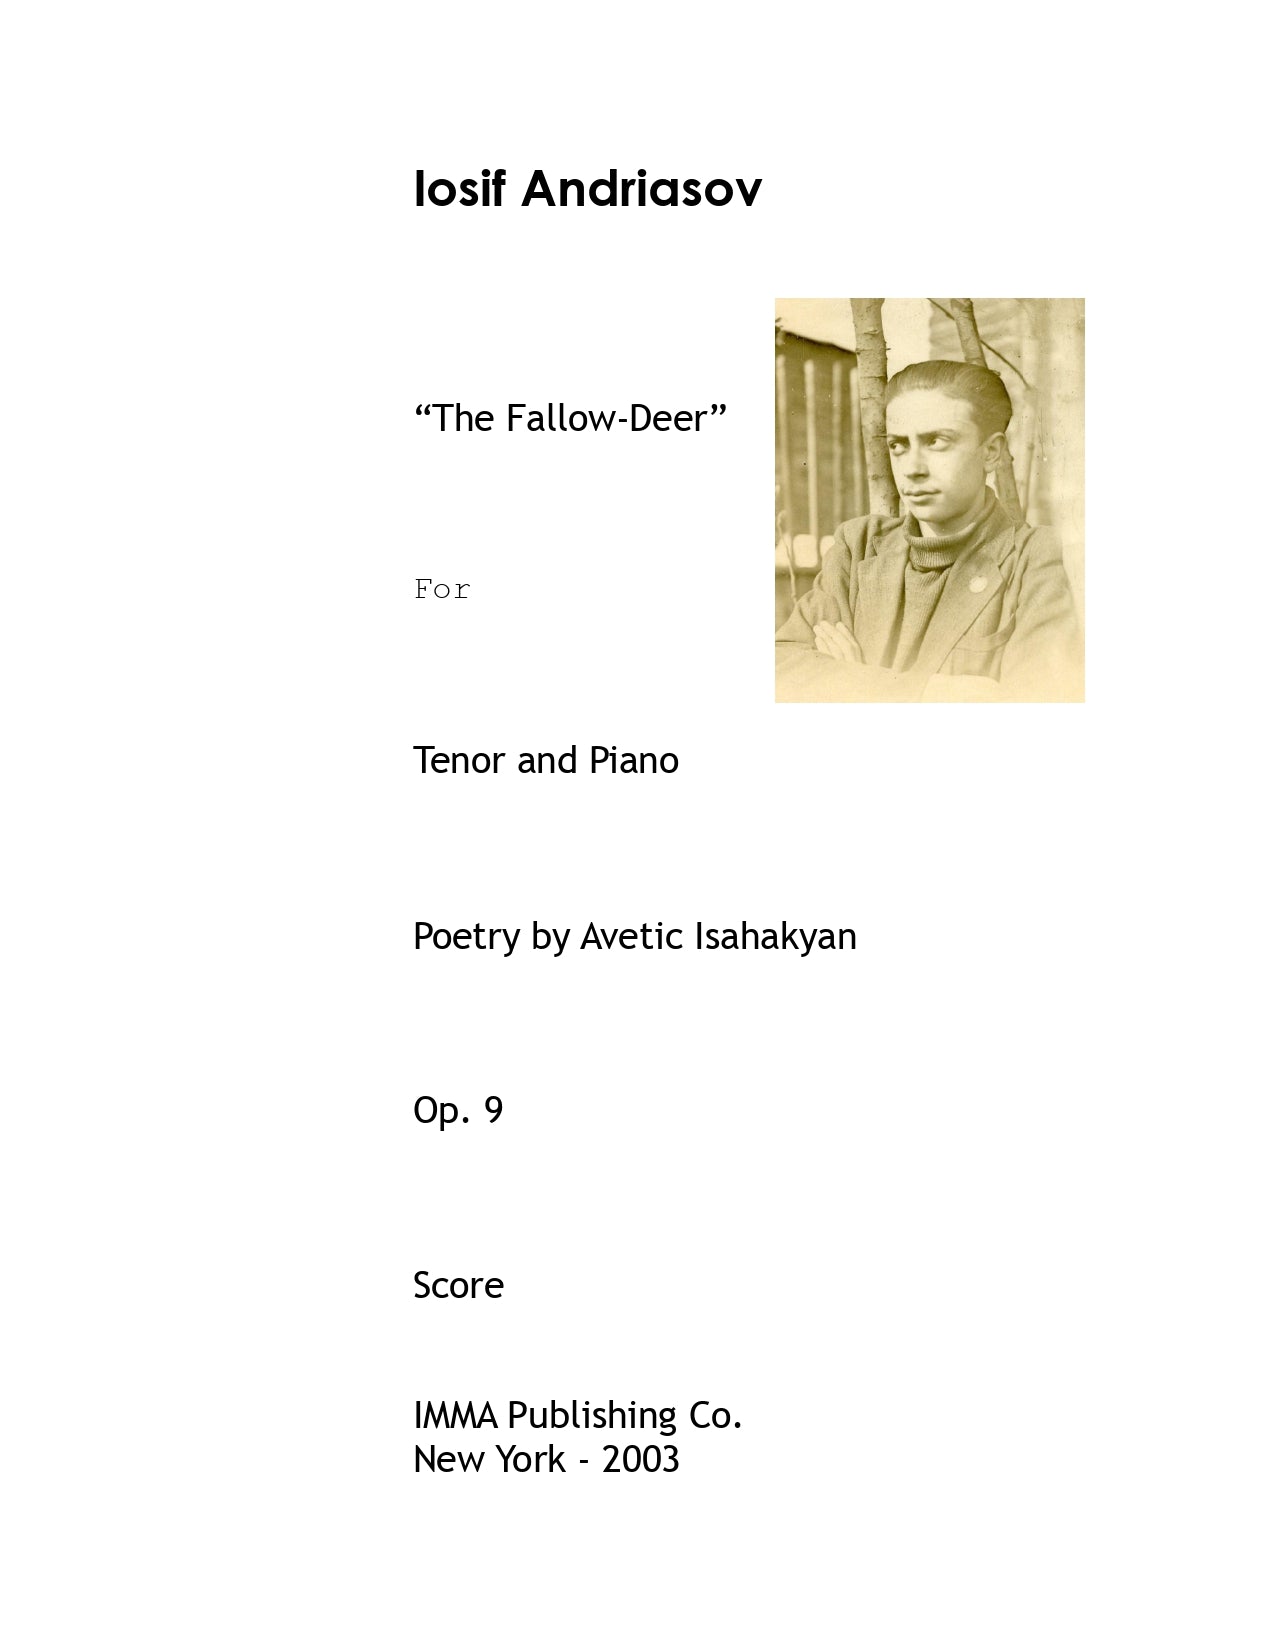 023. Iosif Andriasov: "The Fallow Deer", Op. 9 for Tenor and Piano.